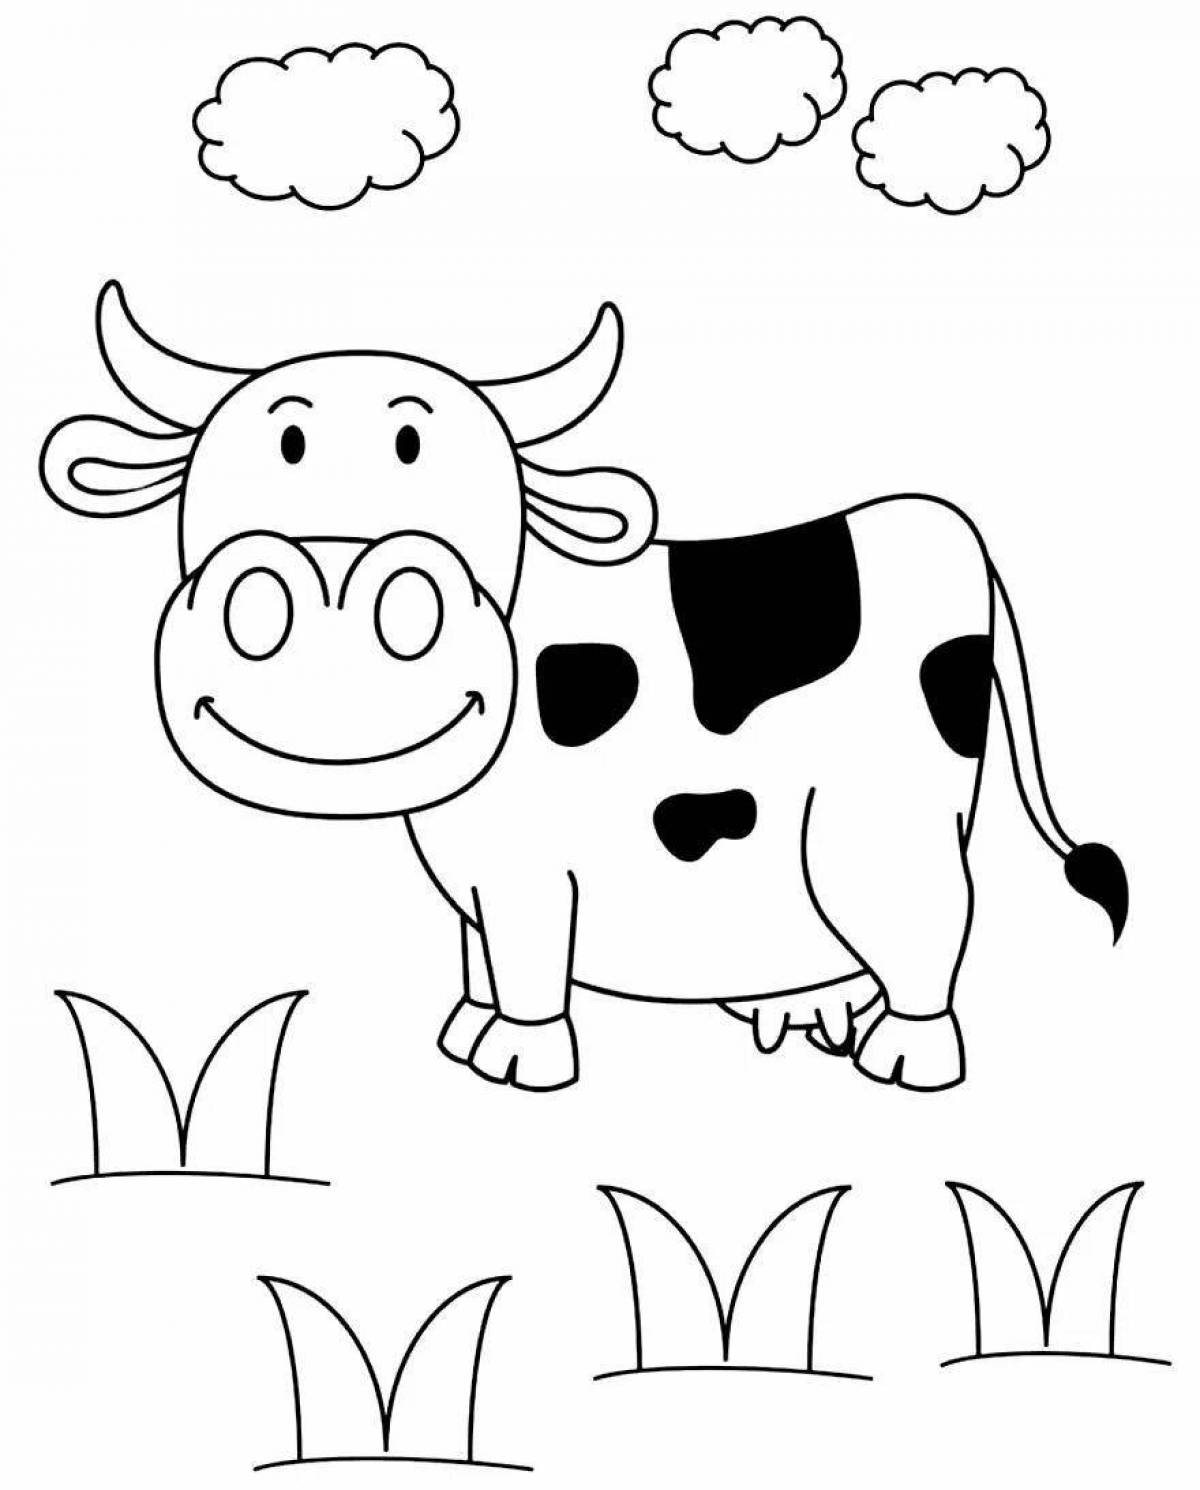 Charming cow coloring book